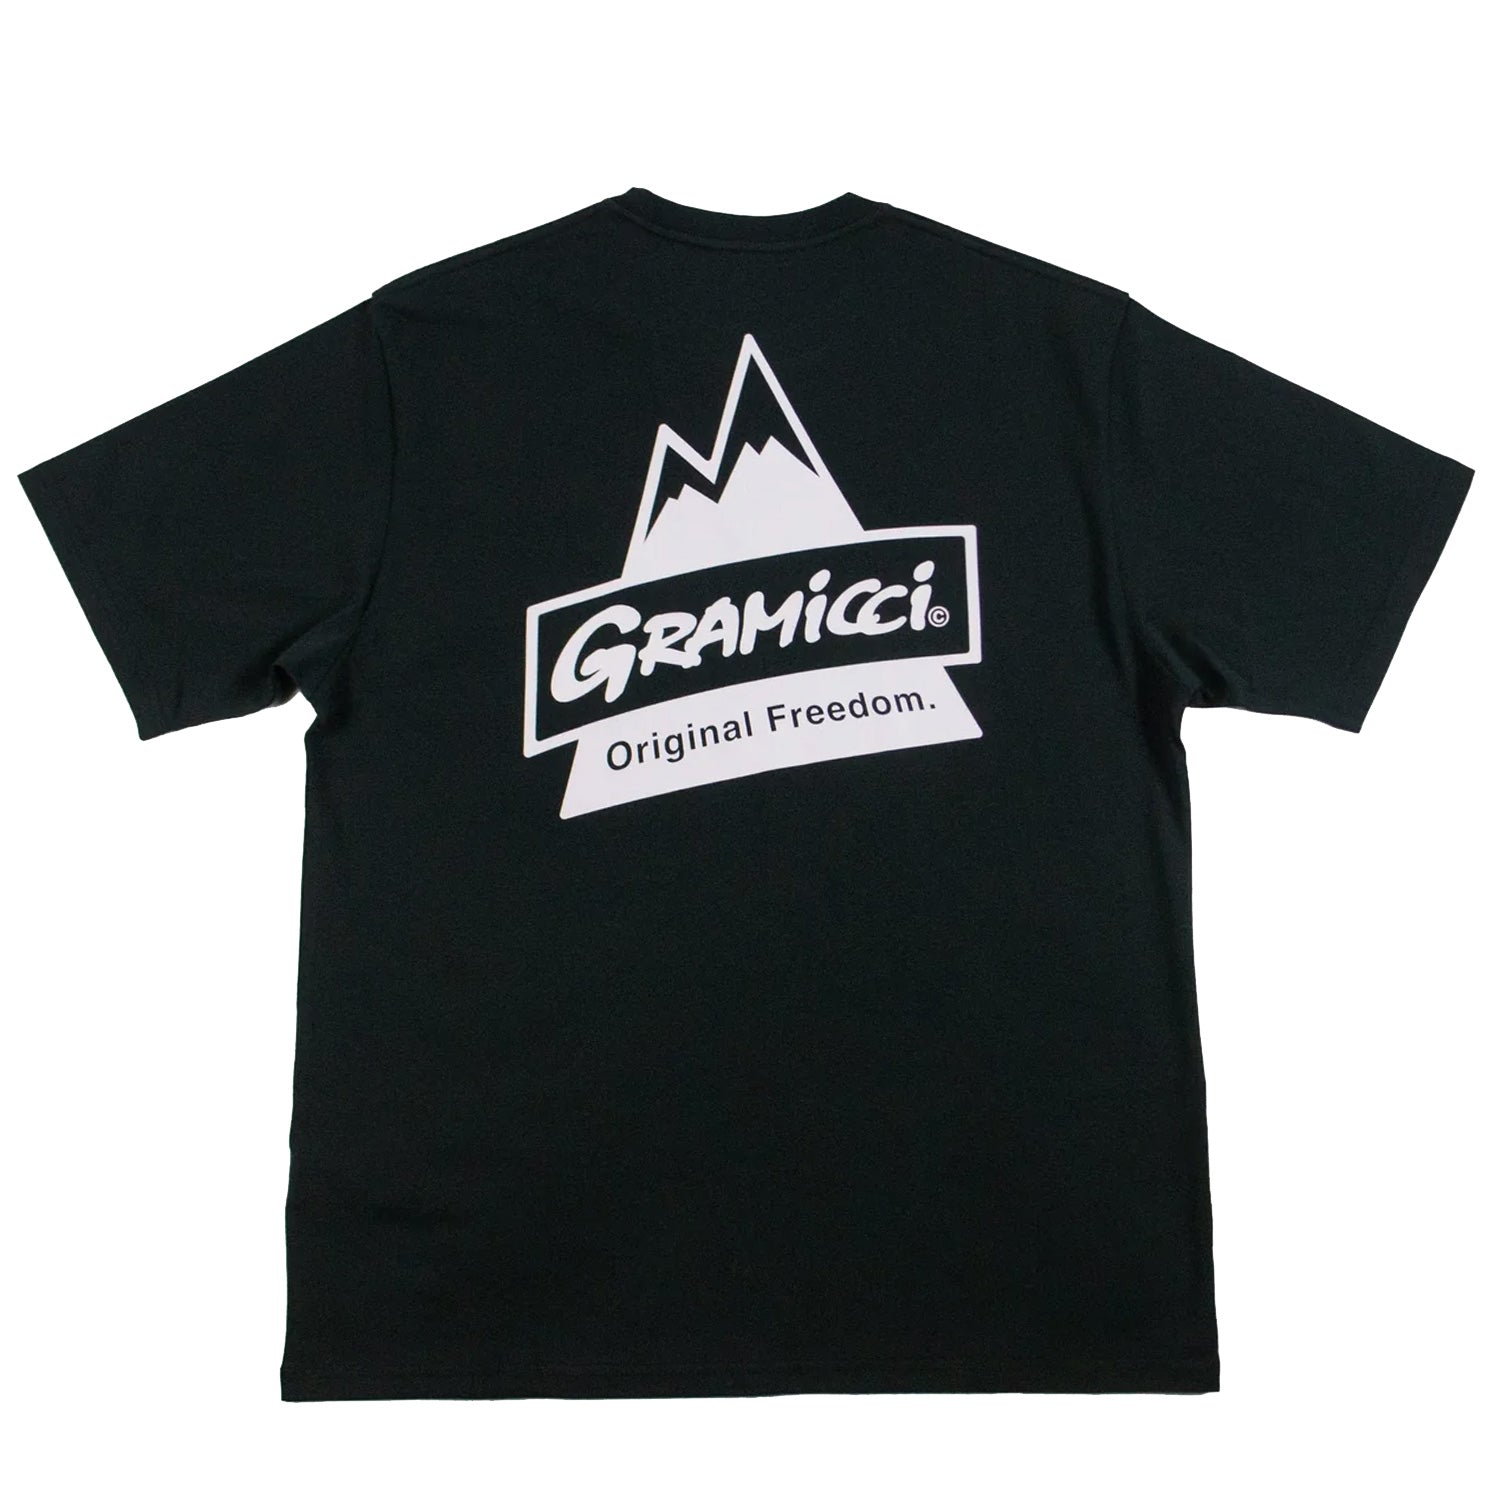 Black short sleeve gramicci original freedom T-shirt with white print logo on front and back. Free uk shipping over £50